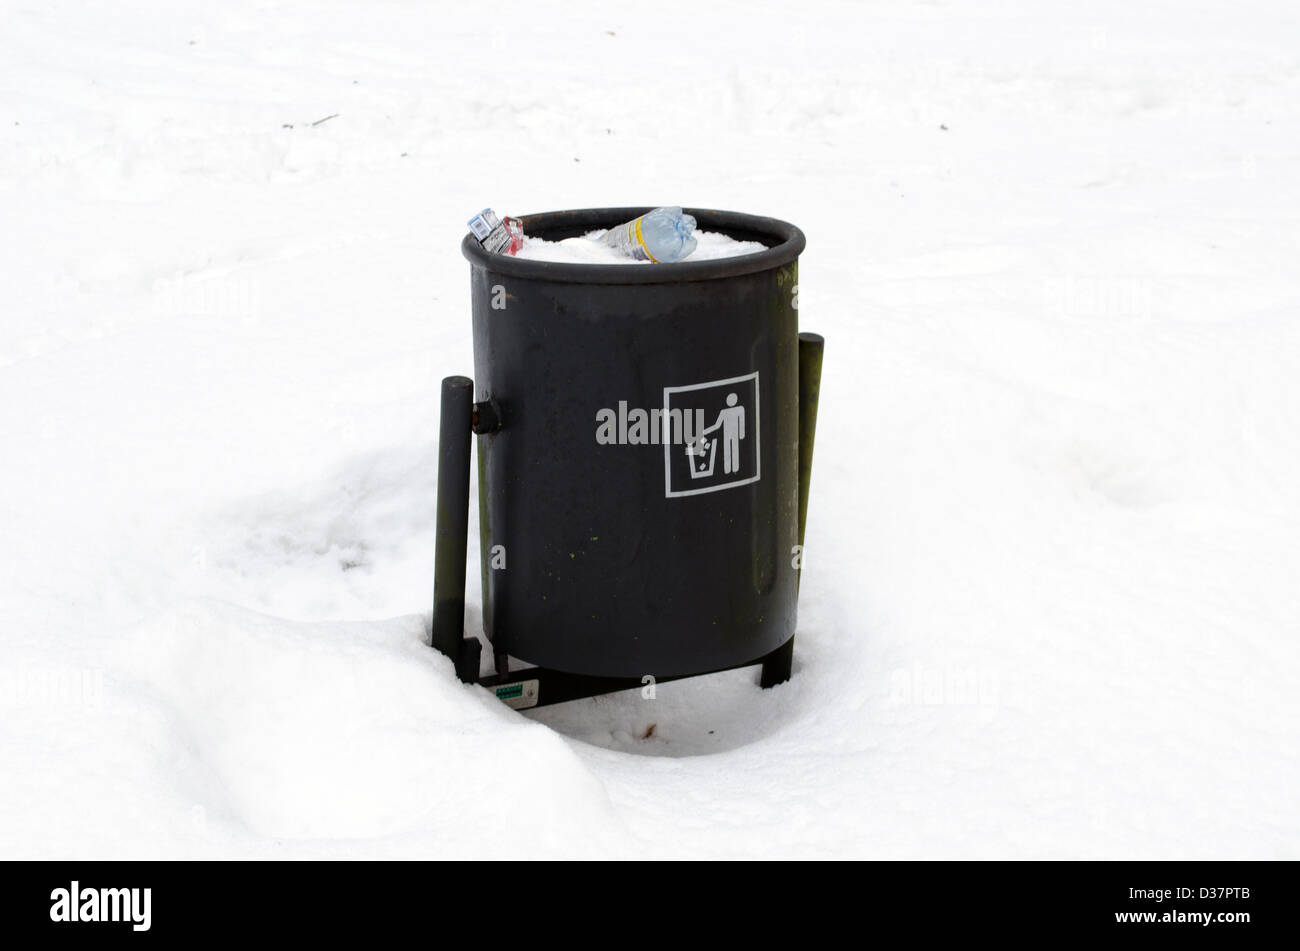 full garbage dustbin waste bin surrounded by snow in winter park. Stock Photo